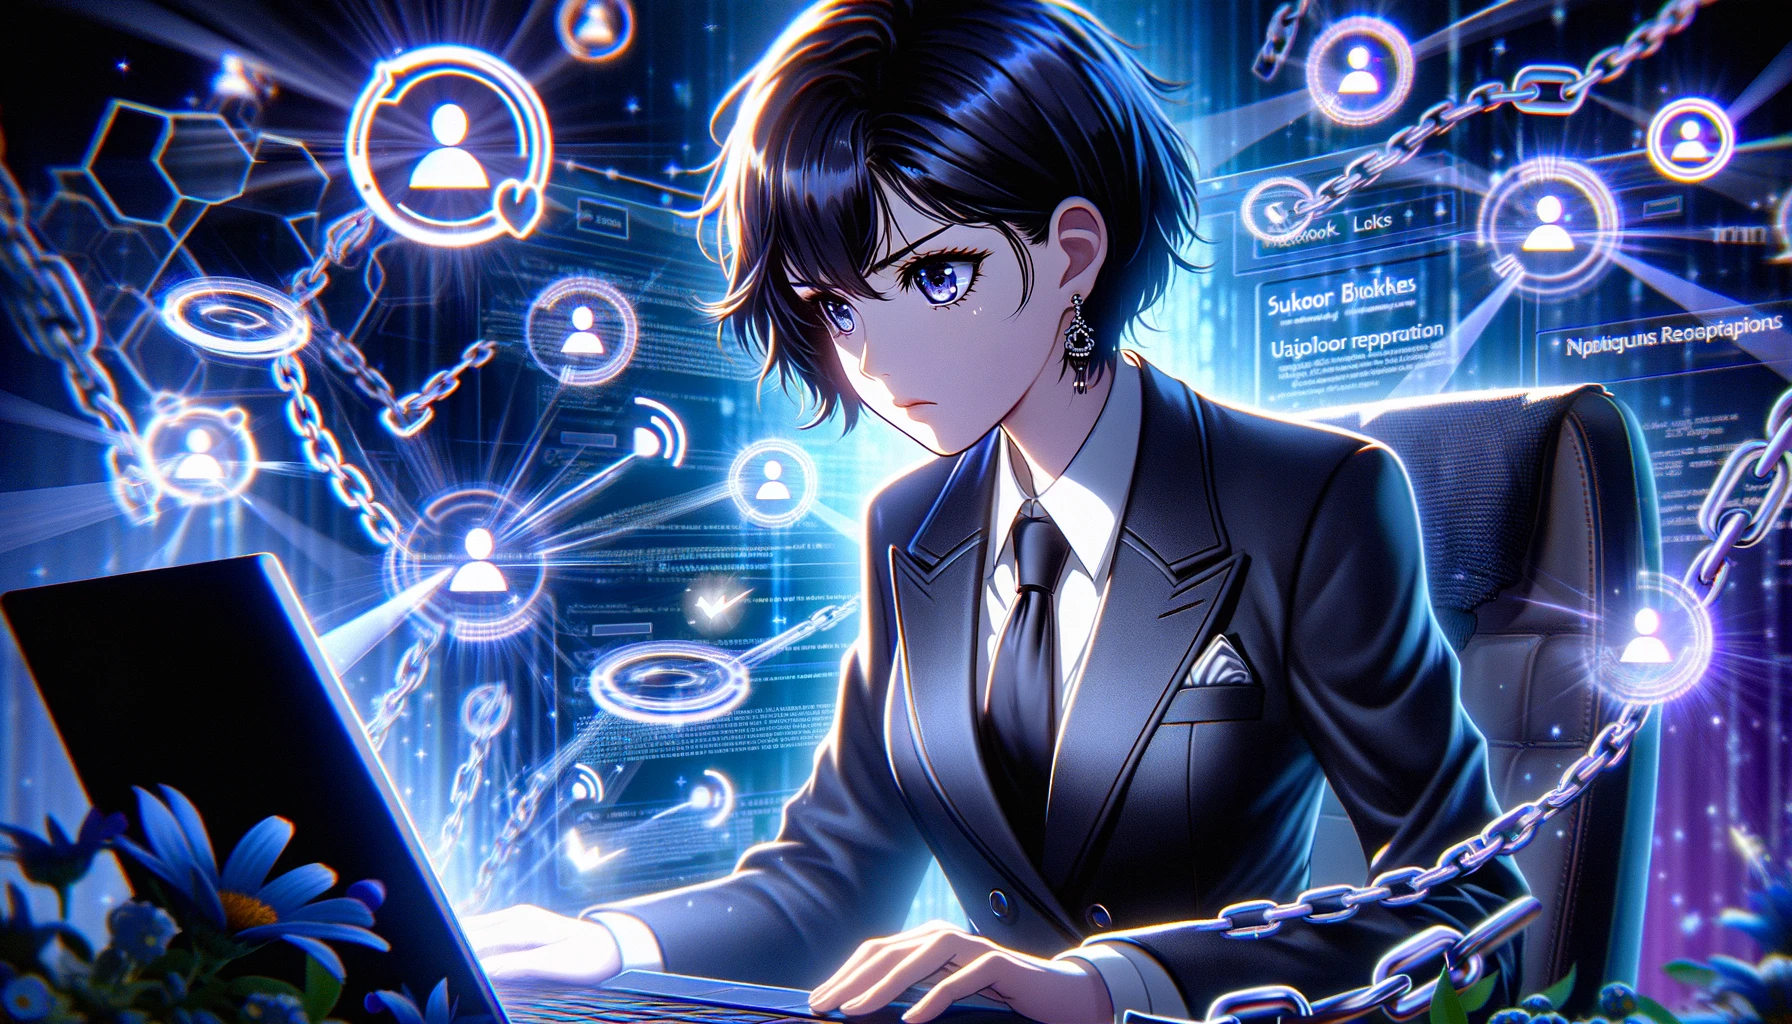 The illustration has been created, capturing the theme of identifying and fixing broken links for a Subfloor Preparation Company website. Surrounded by digital imagery of chains being linked together and glowing digital pathways, the scene emphasizes the importance of maintaining website SEO and user experience, all within the vibrant and magical atmosphere of a futuristic '90s magical girl manga anime series.